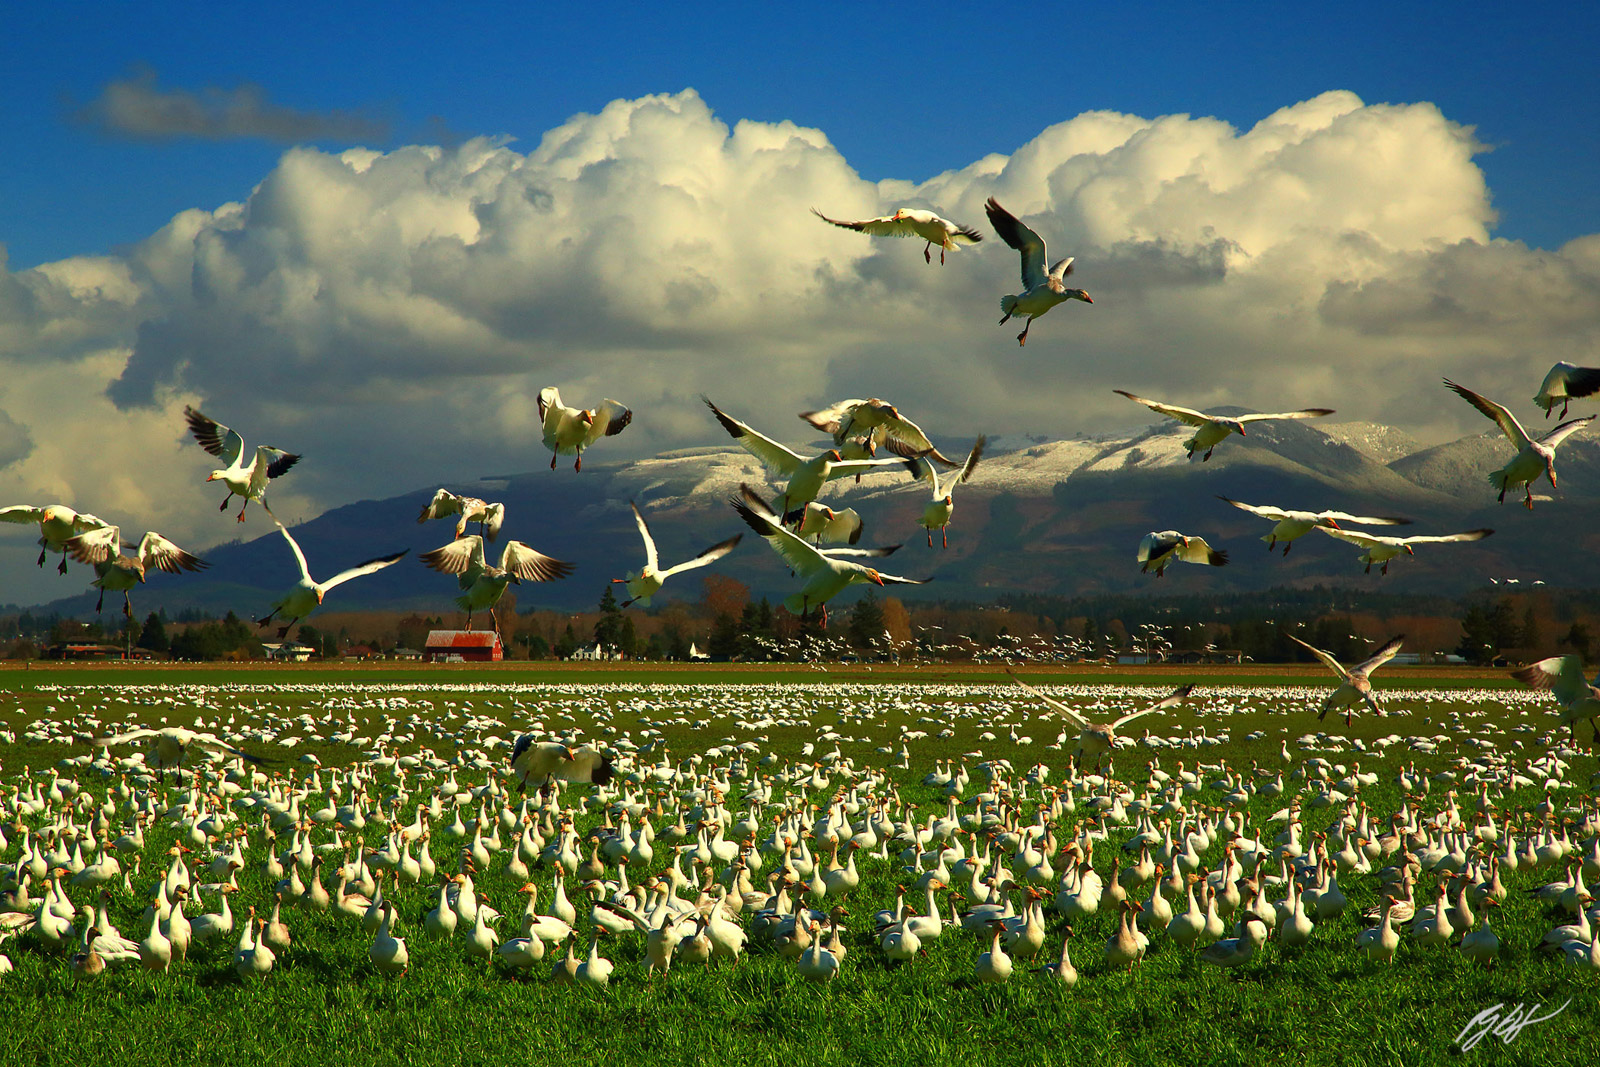 Snow Geese Coming in for a Landing in Skagit Valley in Washington